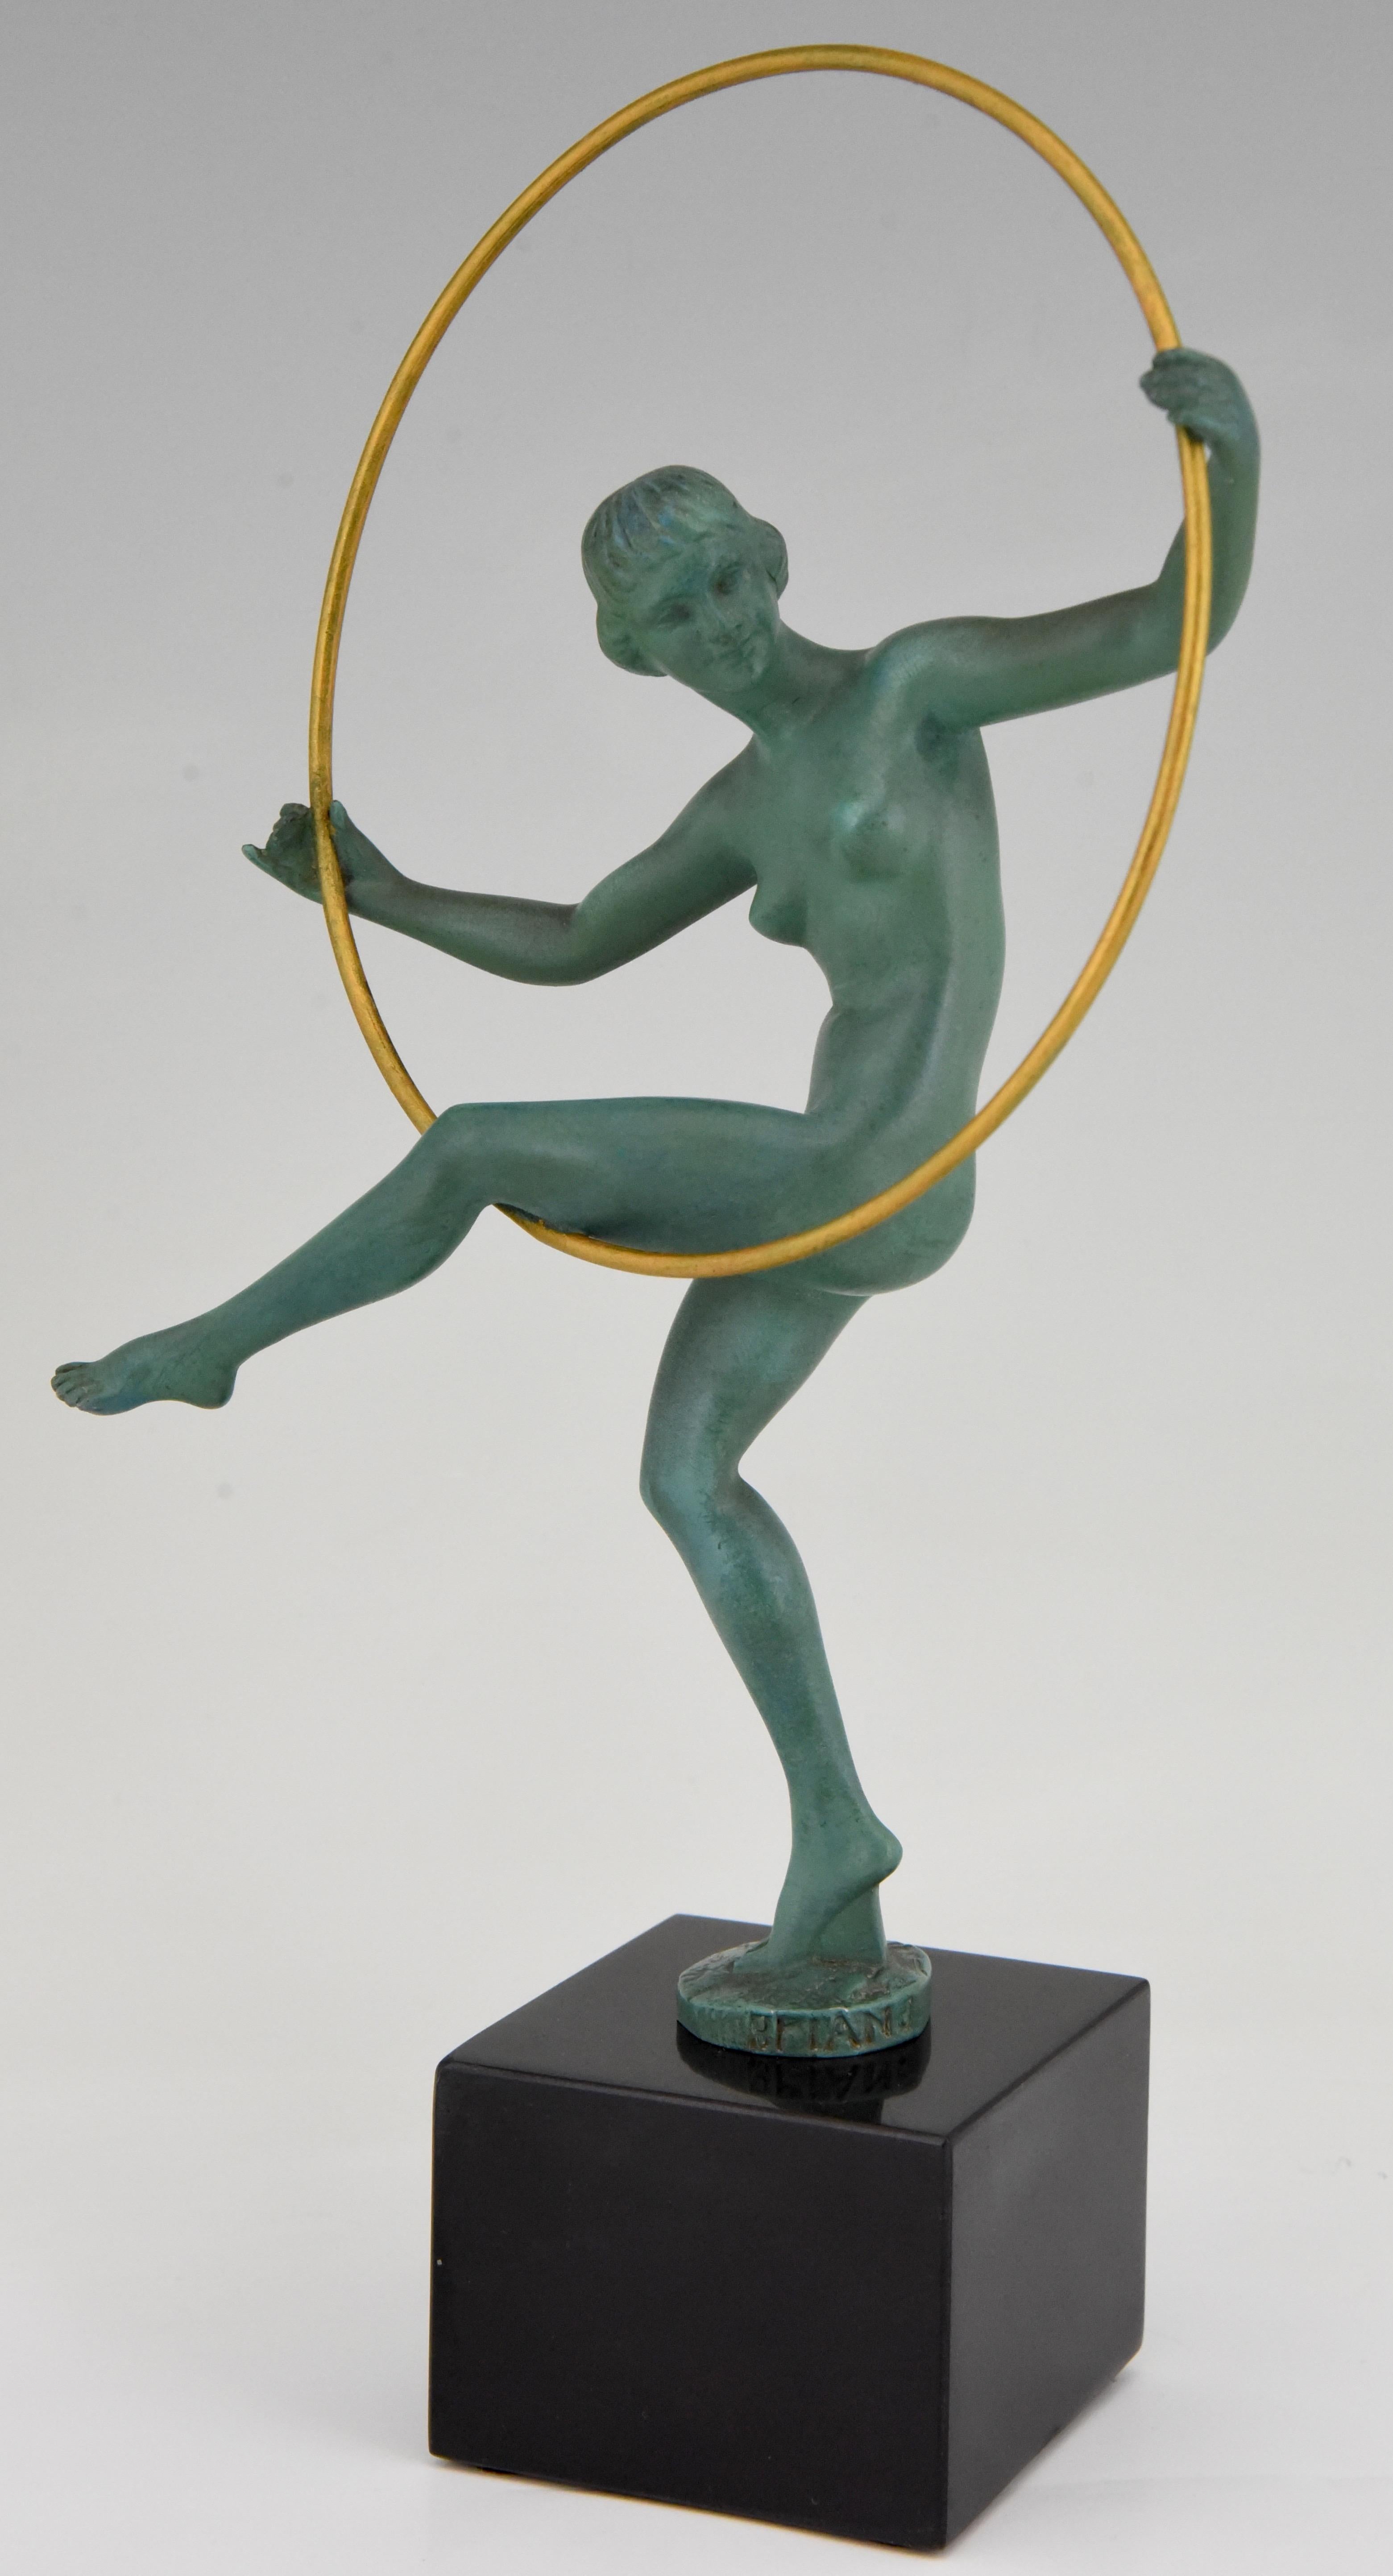 Art Deco sculpture of a dancing nude with hoop. The dancer is signed Briand, pseudonym of Marcel Andre Bouraine and cast at the Max Le Verrier foundry circa 1930. Art metal with green patina on black marble base.

“Art deco sculpture” by Victor